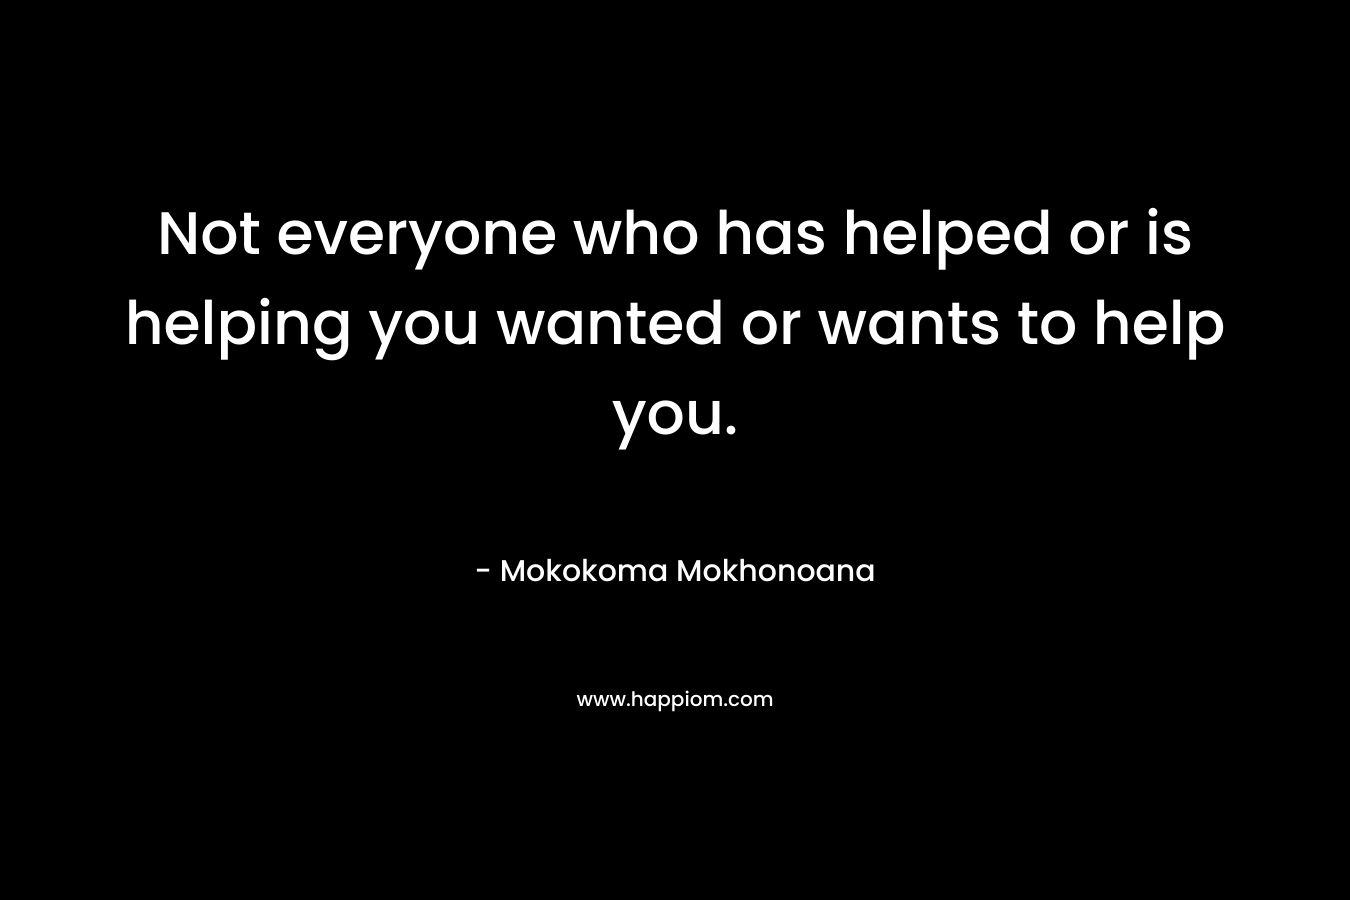 Not everyone who has helped or is helping you wanted or wants to help you.